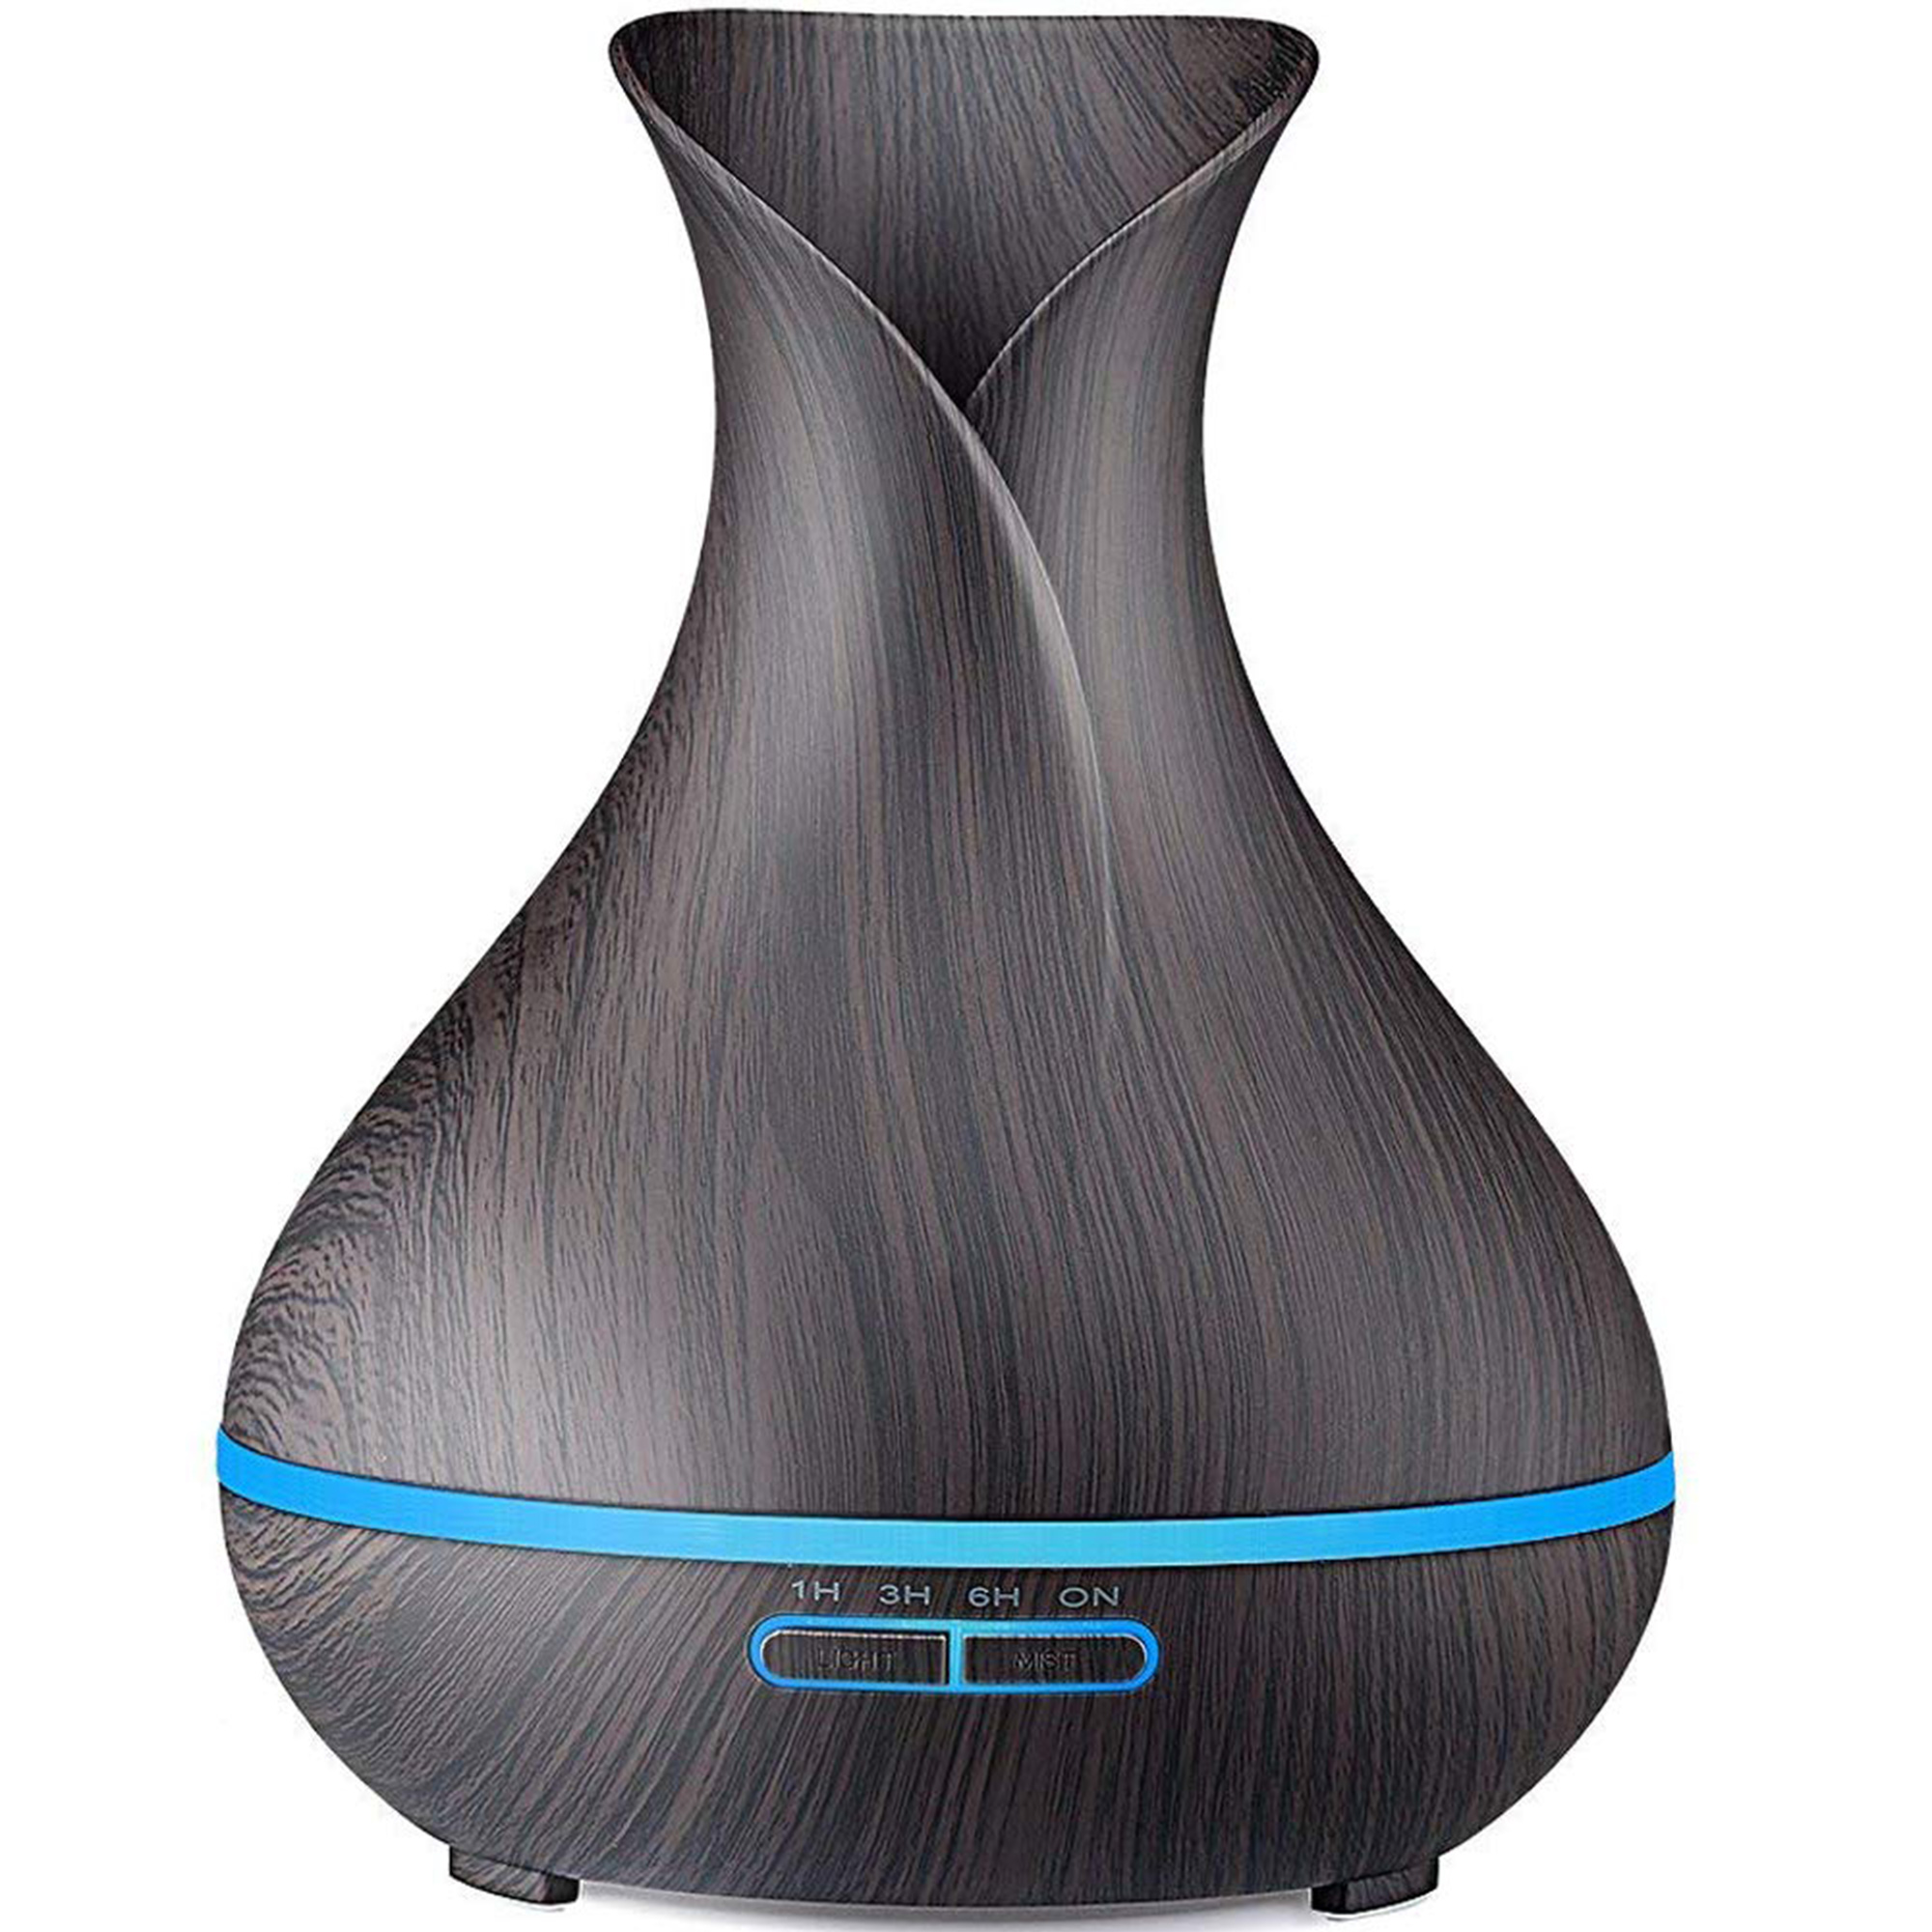 400ml Essential Oil Diffuser Wood Grain Ultrasonic Aromatherapy Cool Mist Humidifiers, 7 Lights 4 Timer by AGPtek - image 1 of 7